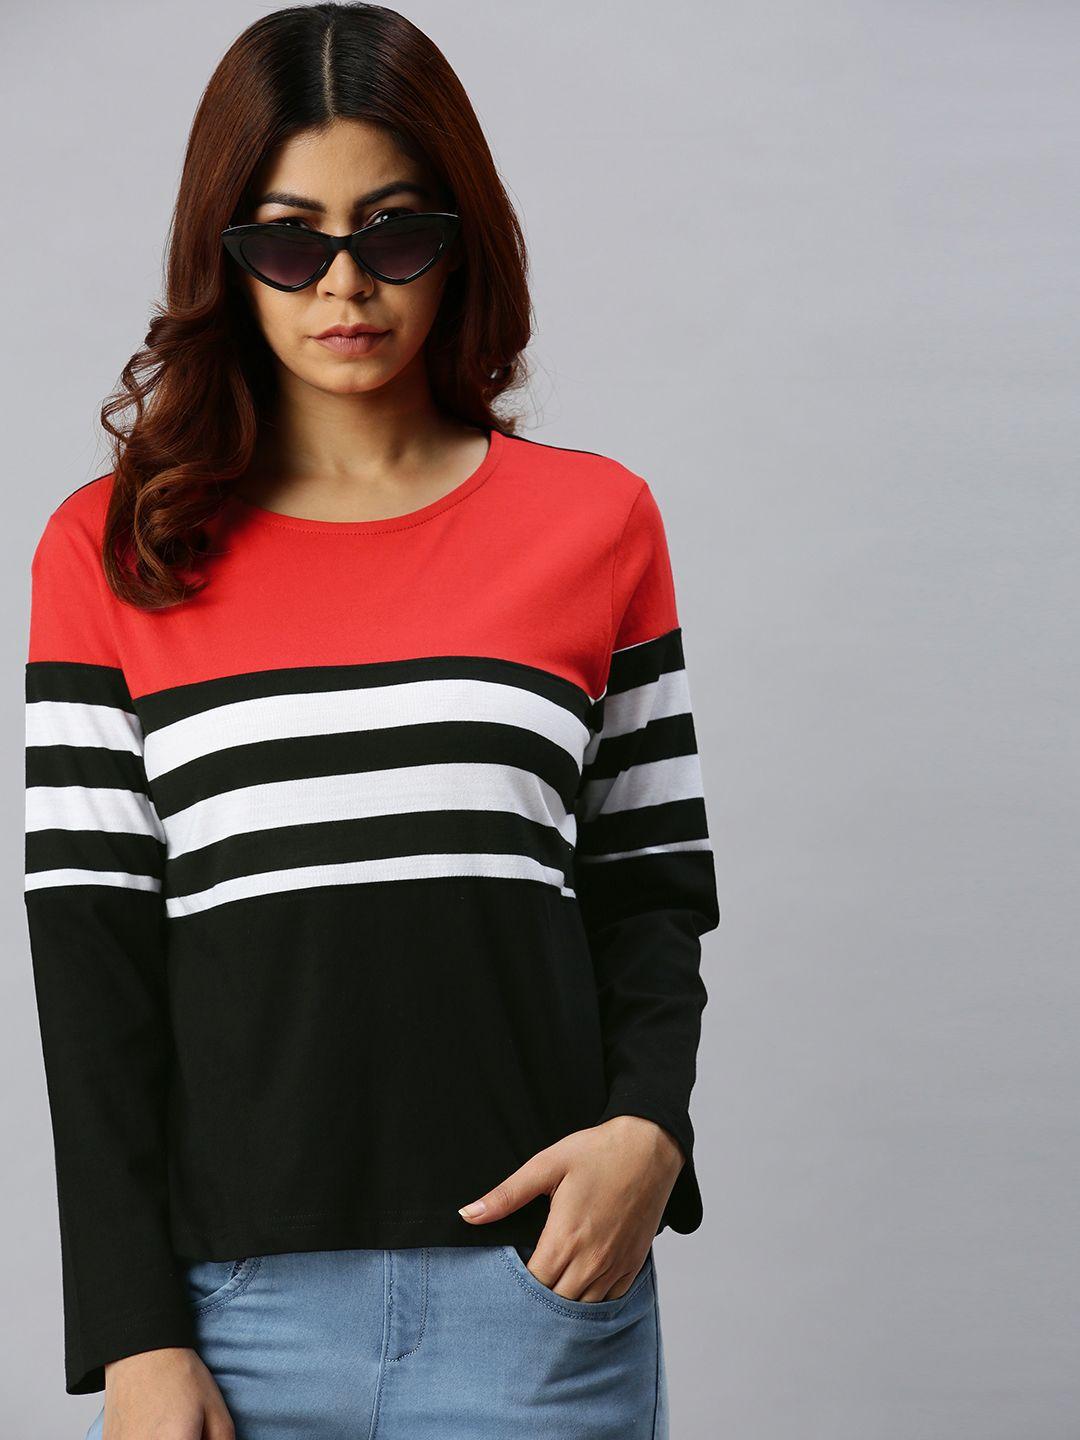 juneberry women red & black colourblocked round neck cotton t-shirt with striped detail